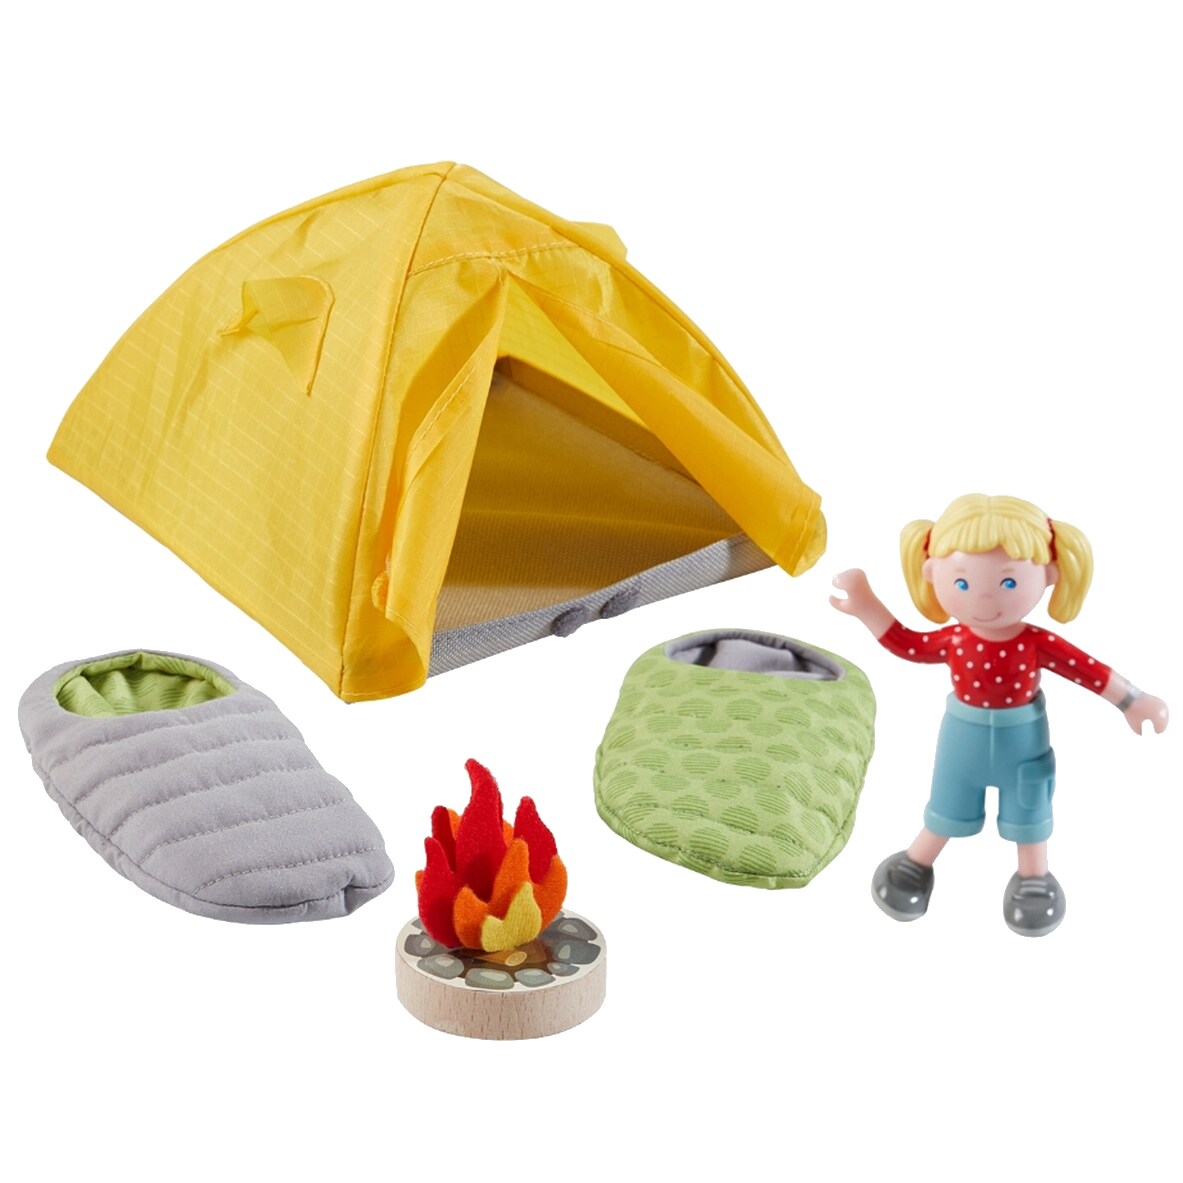 HABA Little Friends Camping Play Set - Includes Tent, 2 Reversible Sleeping Bags, Campfire and 4&#x22; Bendy Girl Figure